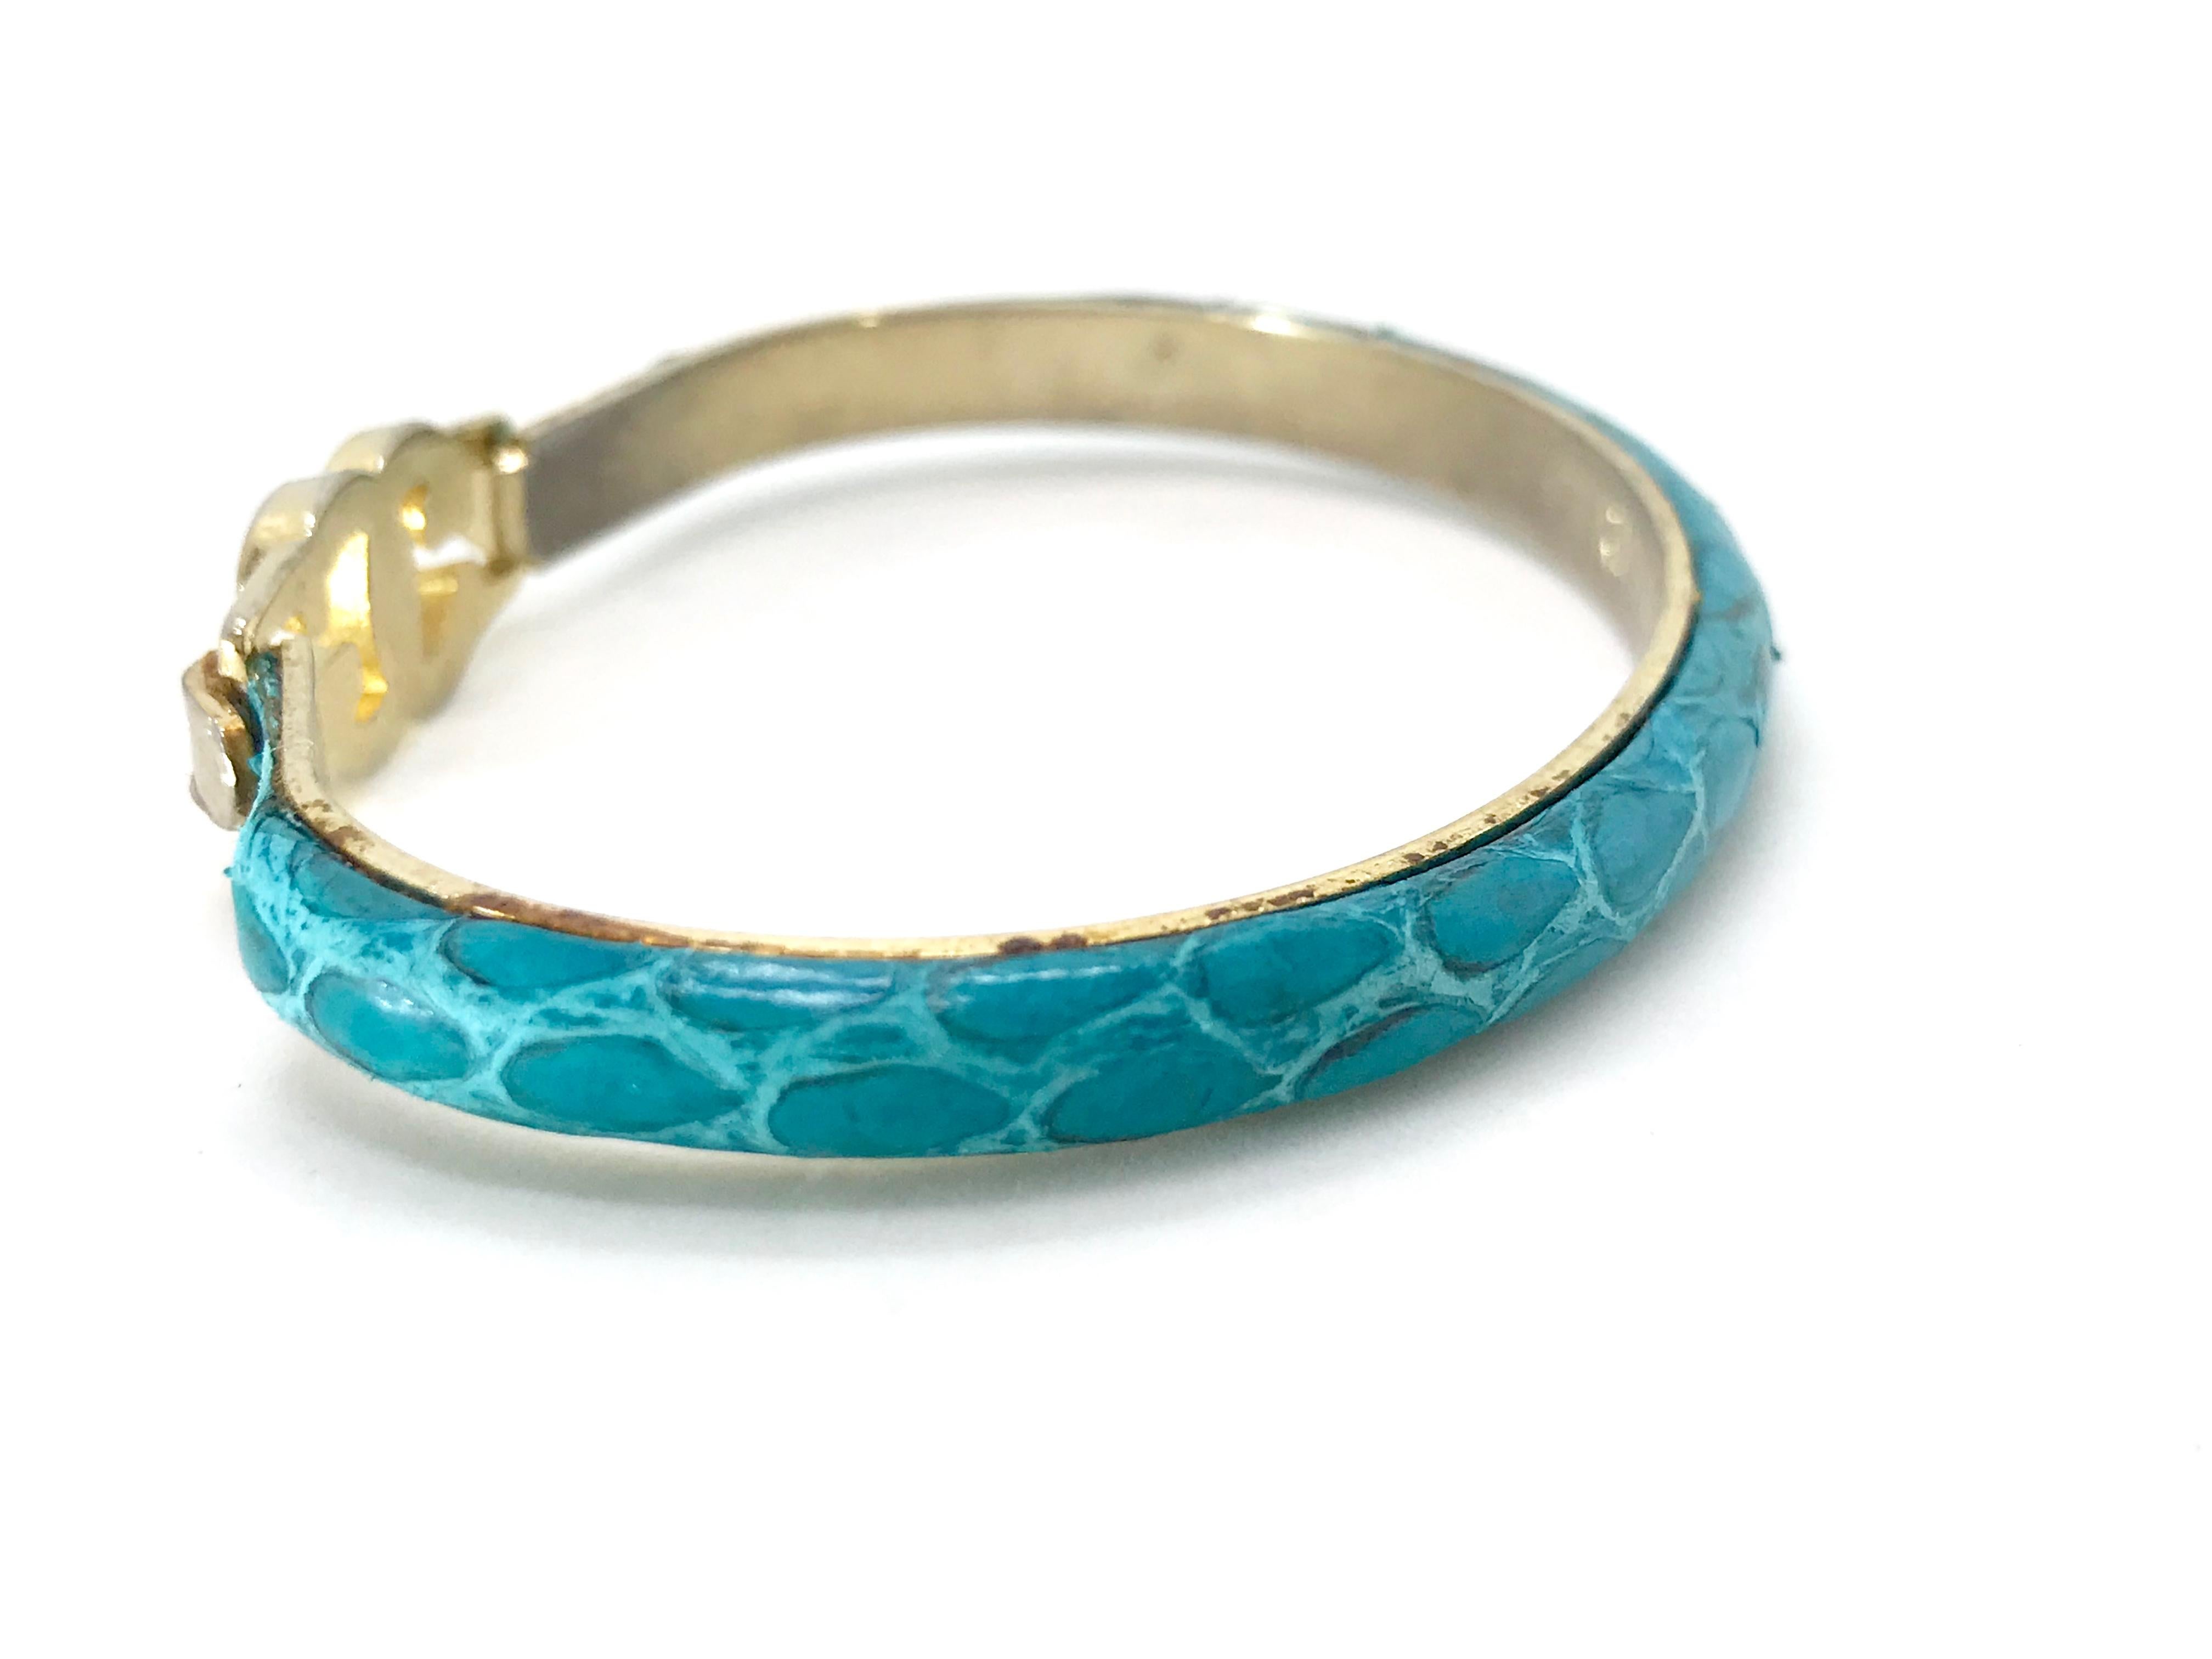 Vintage Gucci gold plated teal snakeskin leather bracelet. 1970's bracelet with GG gold plated clasp. 

Inside of bracelet is marked Peruzzi-Florence. Measures about 2 1/4